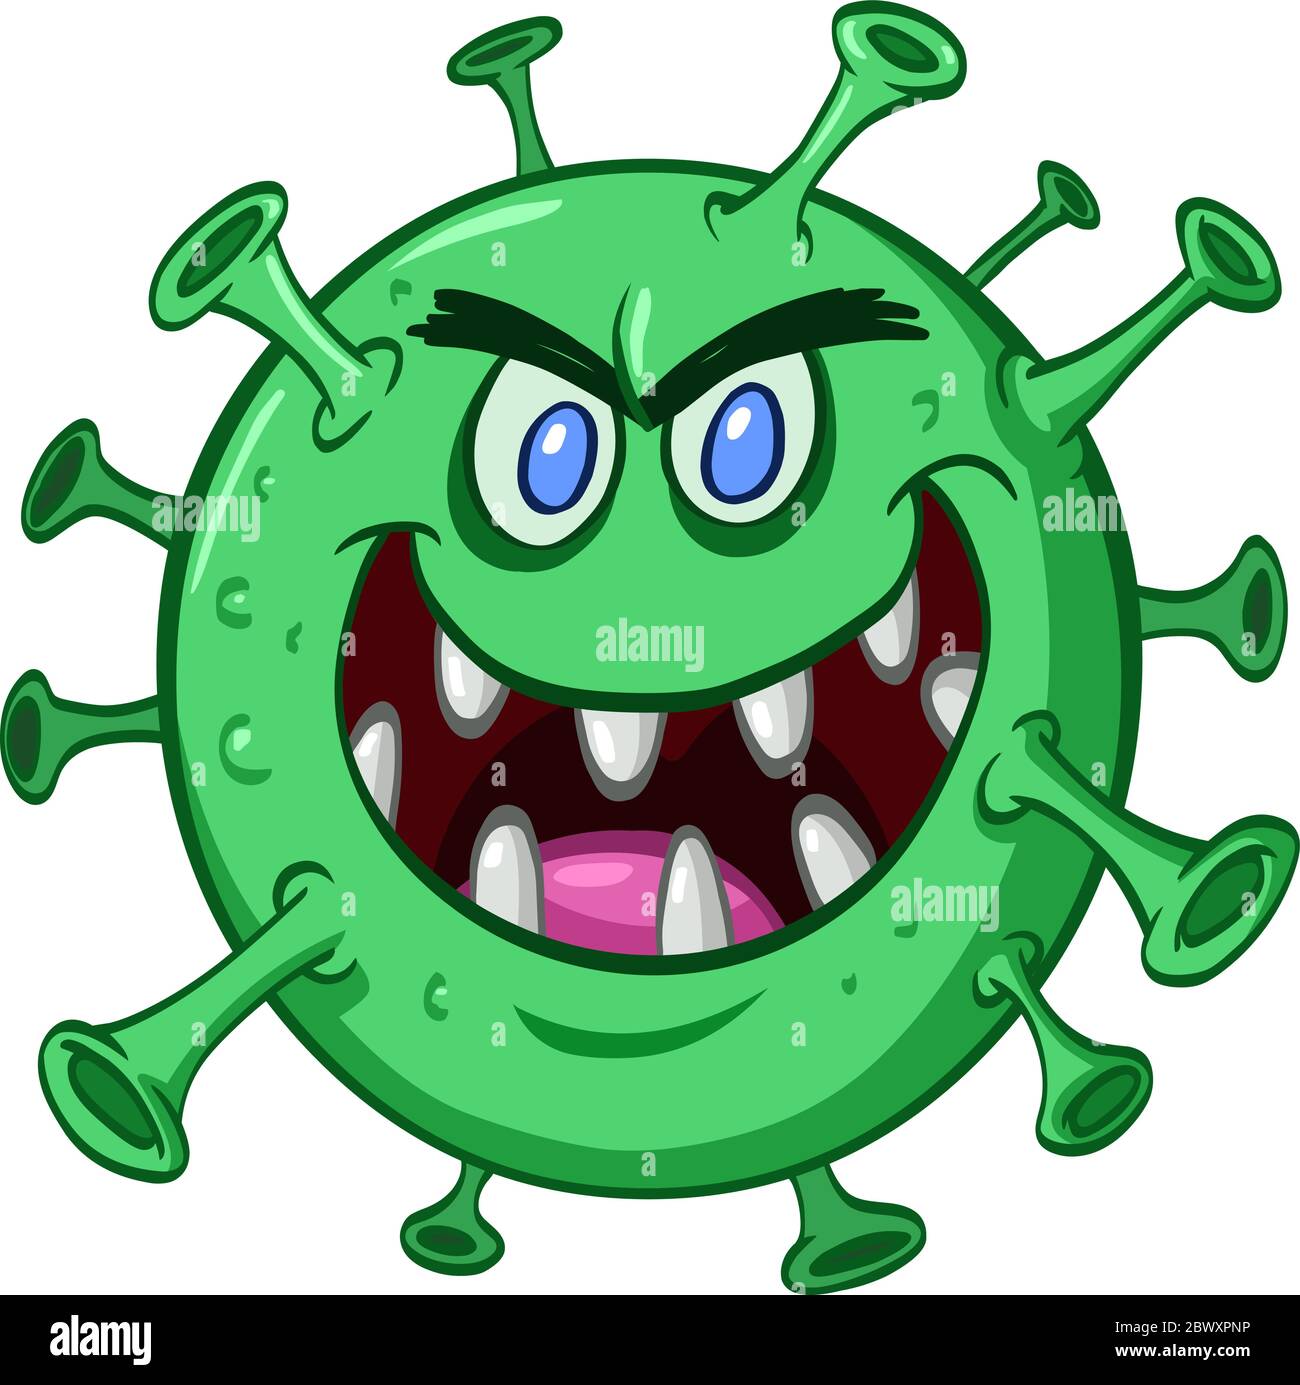 Cartoon Green Evil Virus Laughing Stock Vector Image Art Alamy Find cute cartoon pictures from our collection of adorable images. https www alamy com cartoon green evil virus laughing image360162370 html